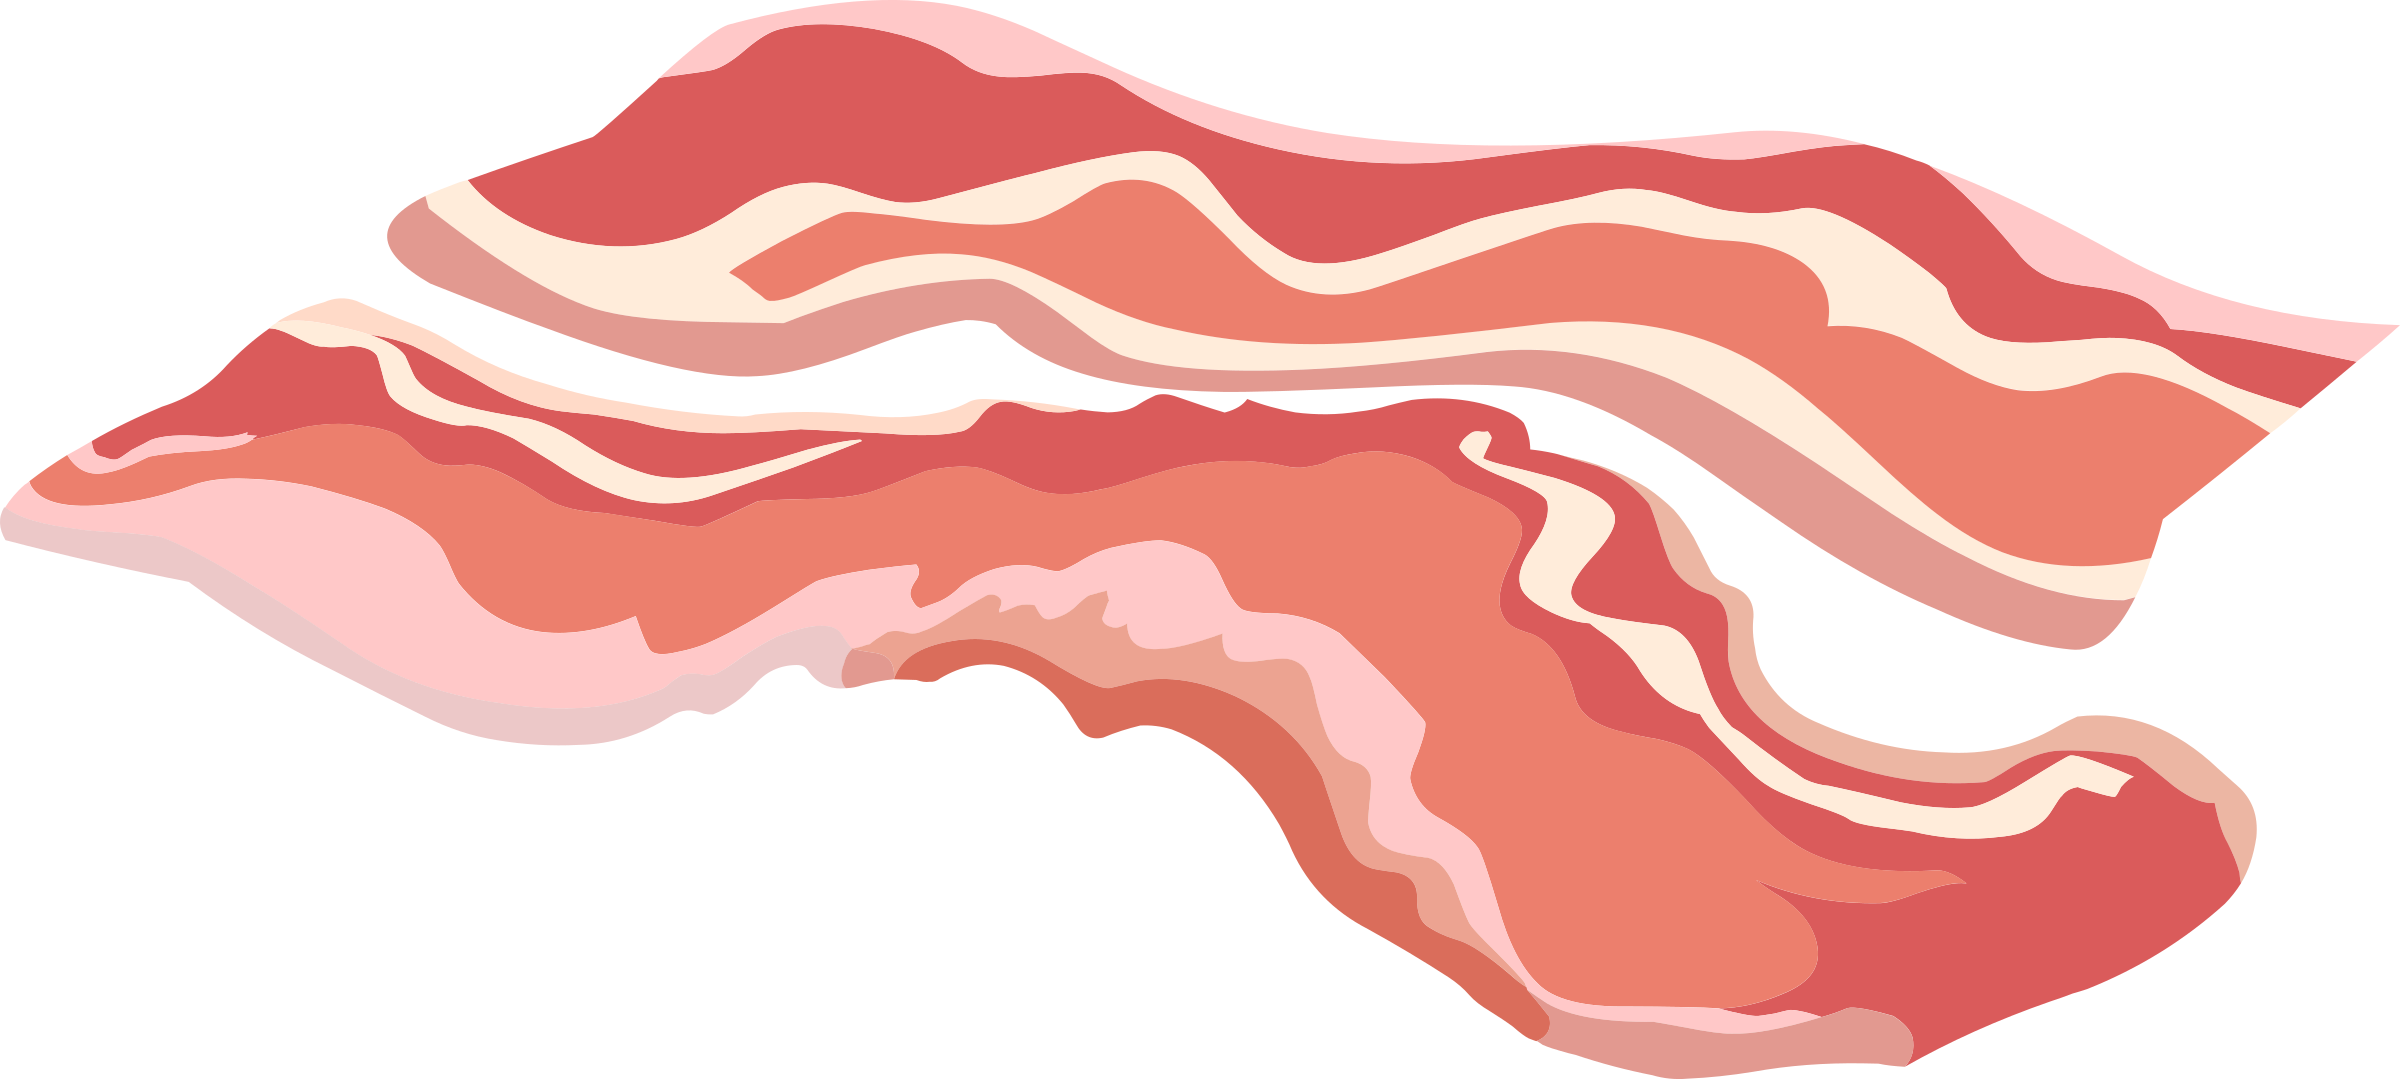 Png images free download. Bacon clipart transparent background